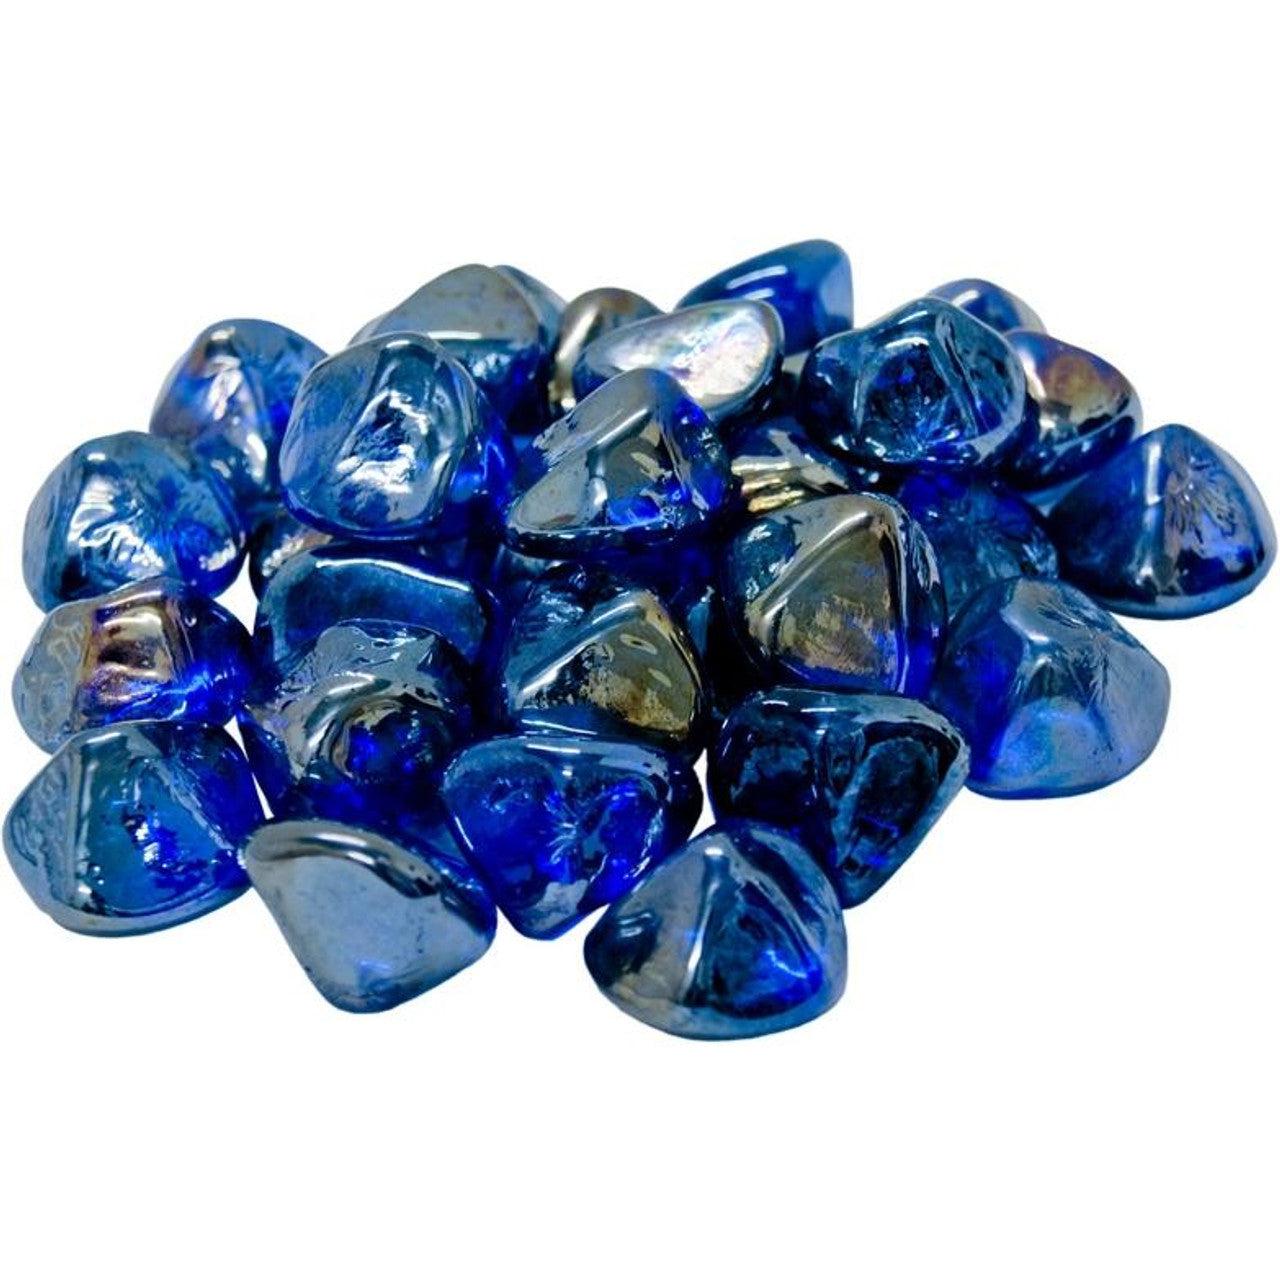 10 lb. Package of Diamond Nuggets Glass Media